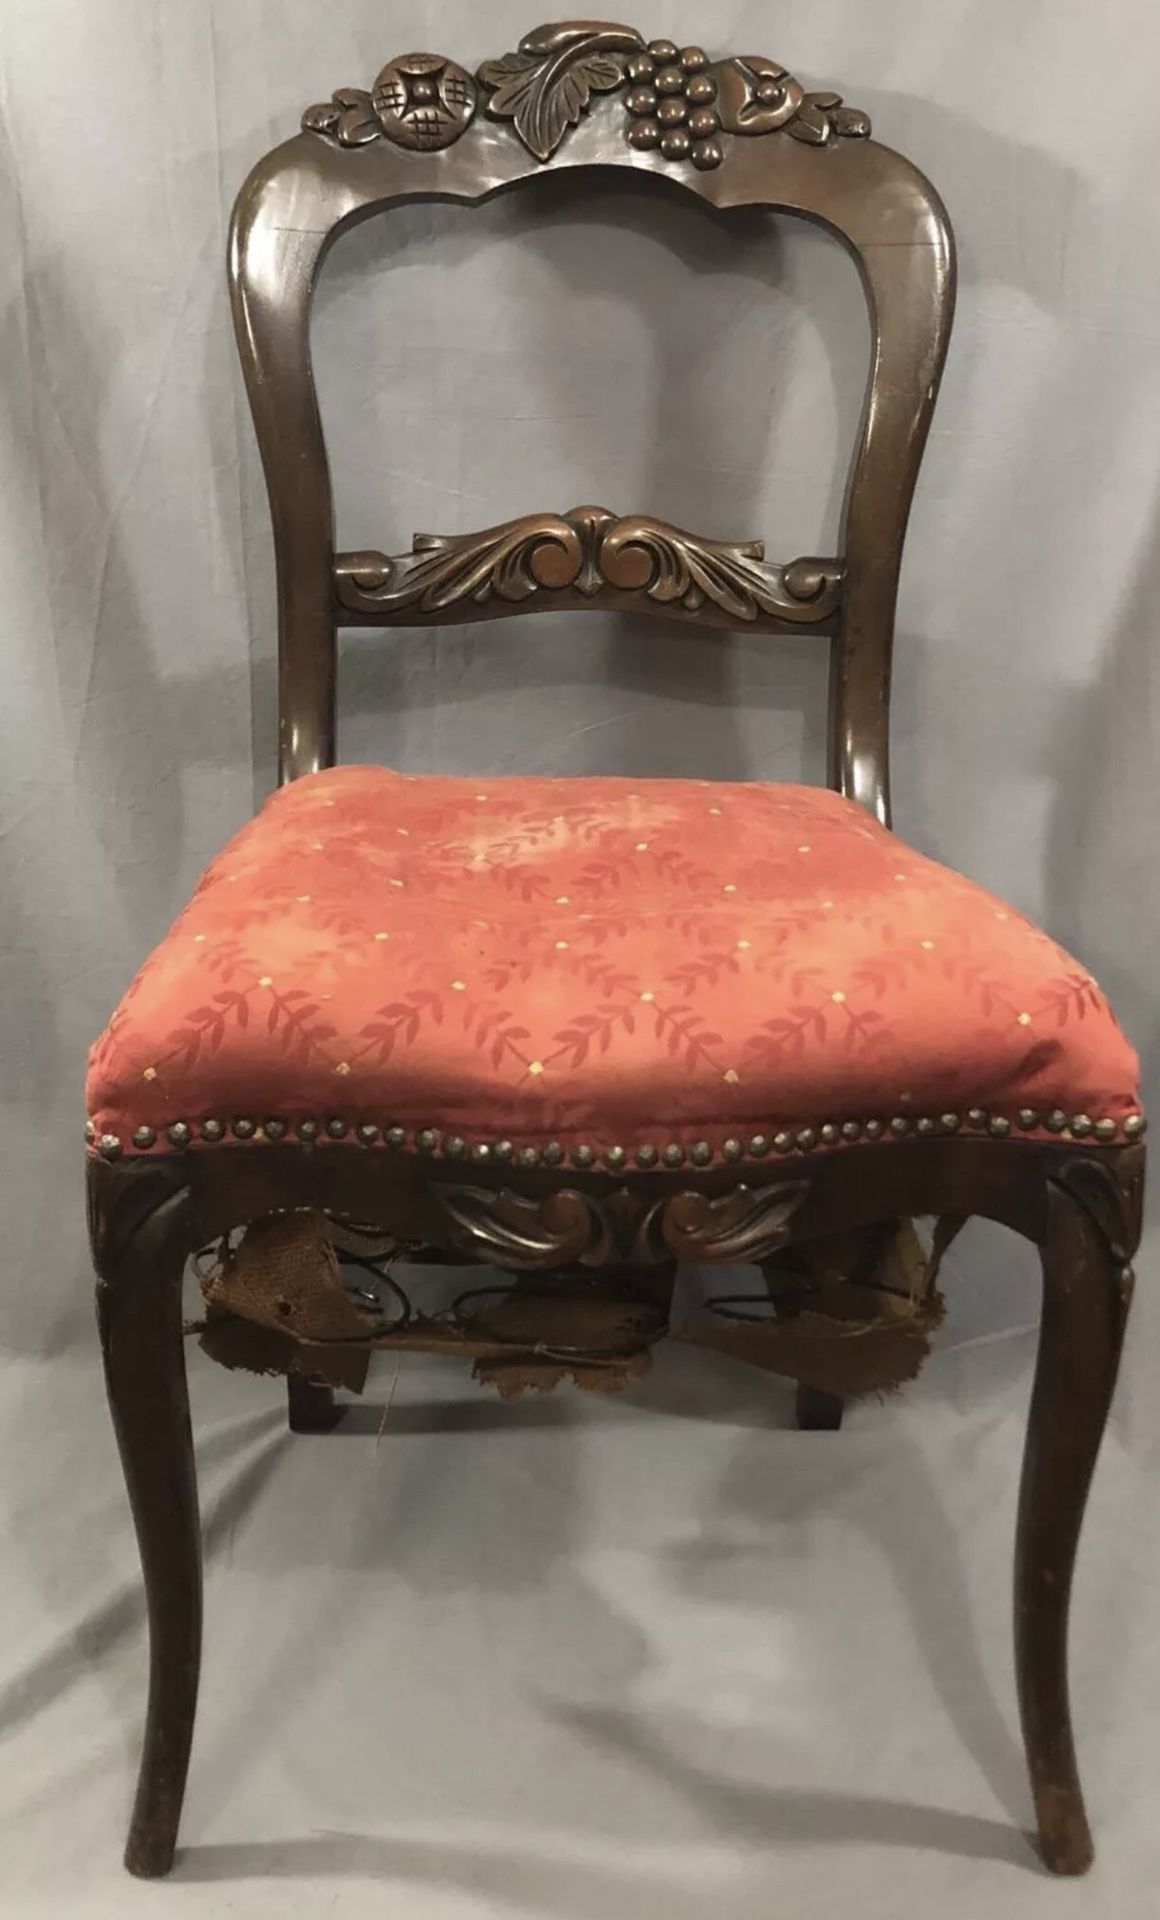 Vintage Antique Victorian Style Fruit Carved Chair For Repair Upcycle Redo